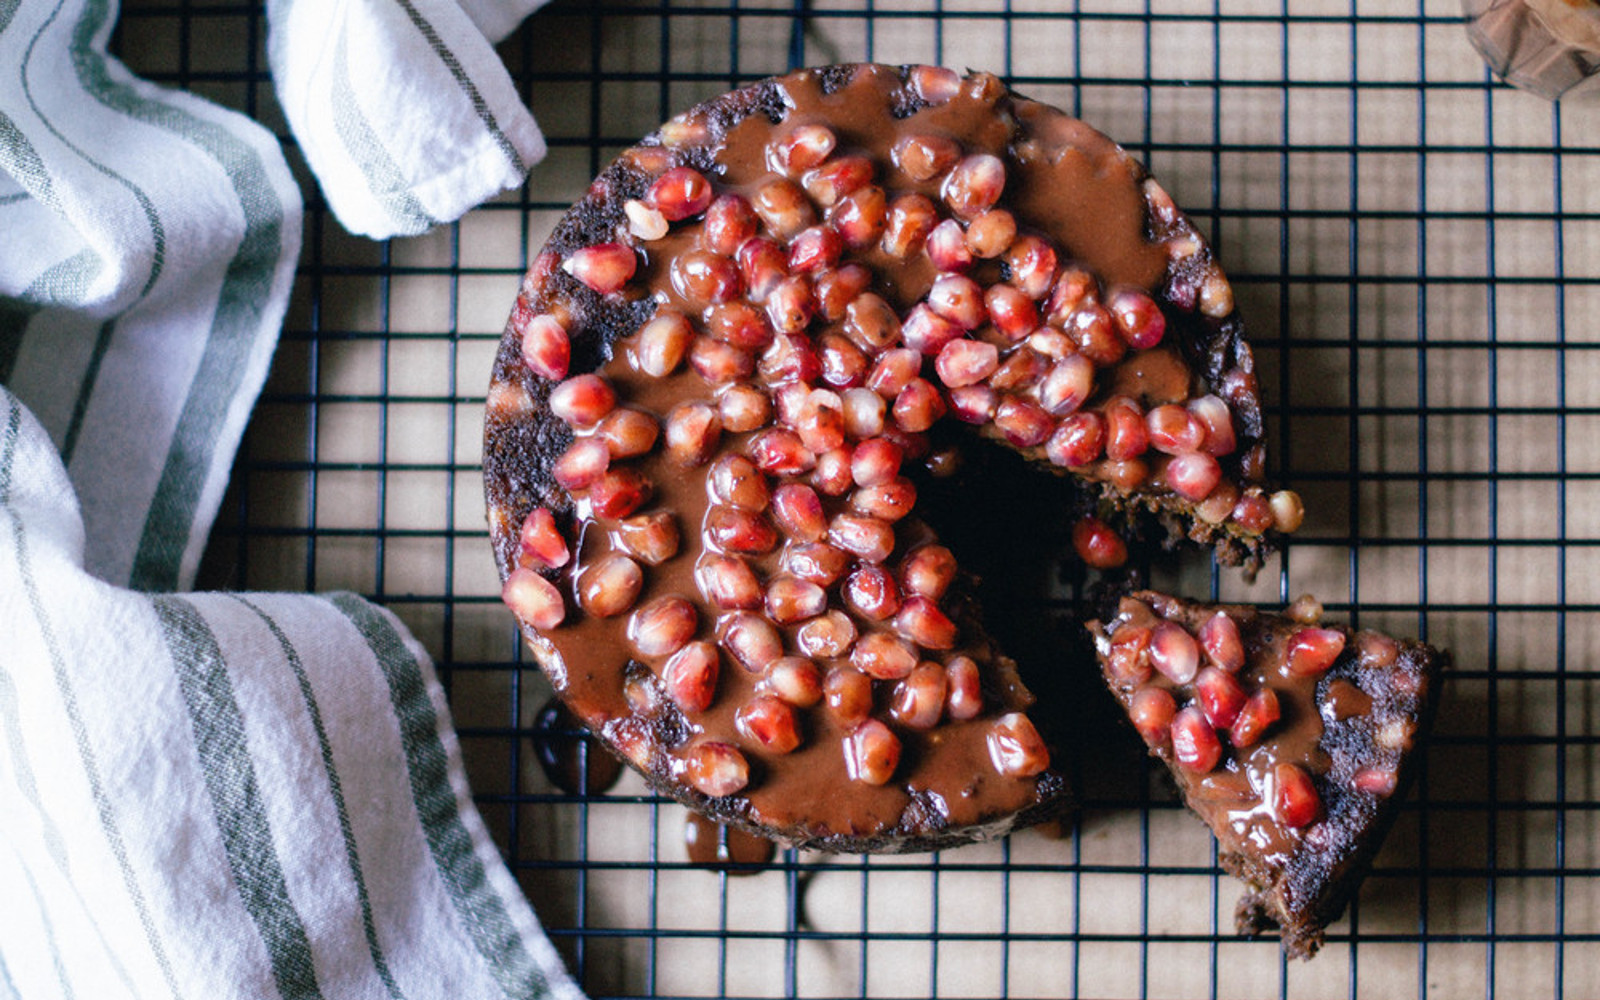 Pomegranate and Molasses Upside Down Cake